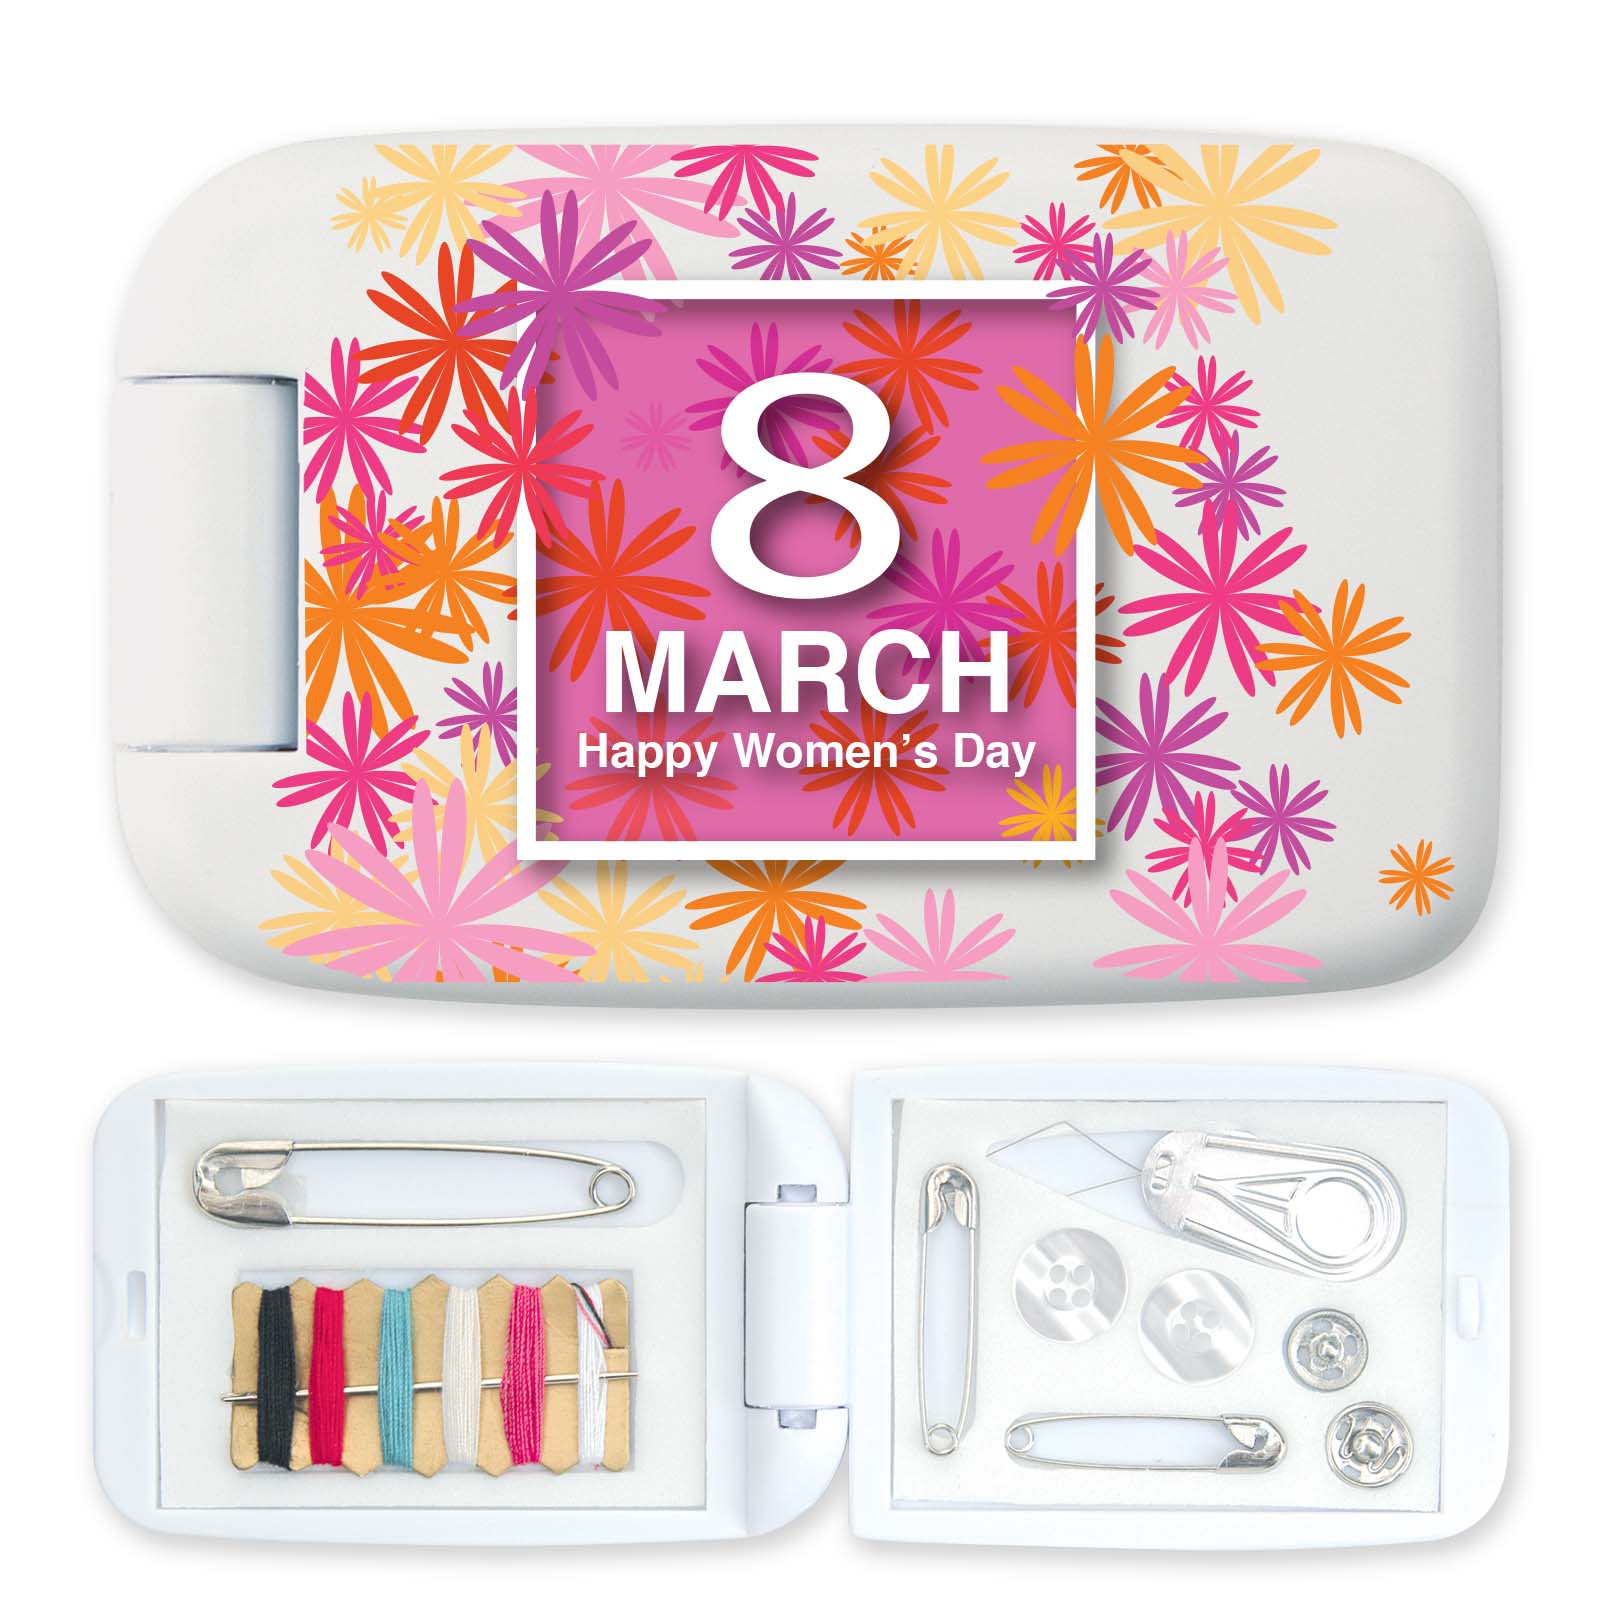 Sewing Kits Stitch-In-Time Sewing Kit Kit